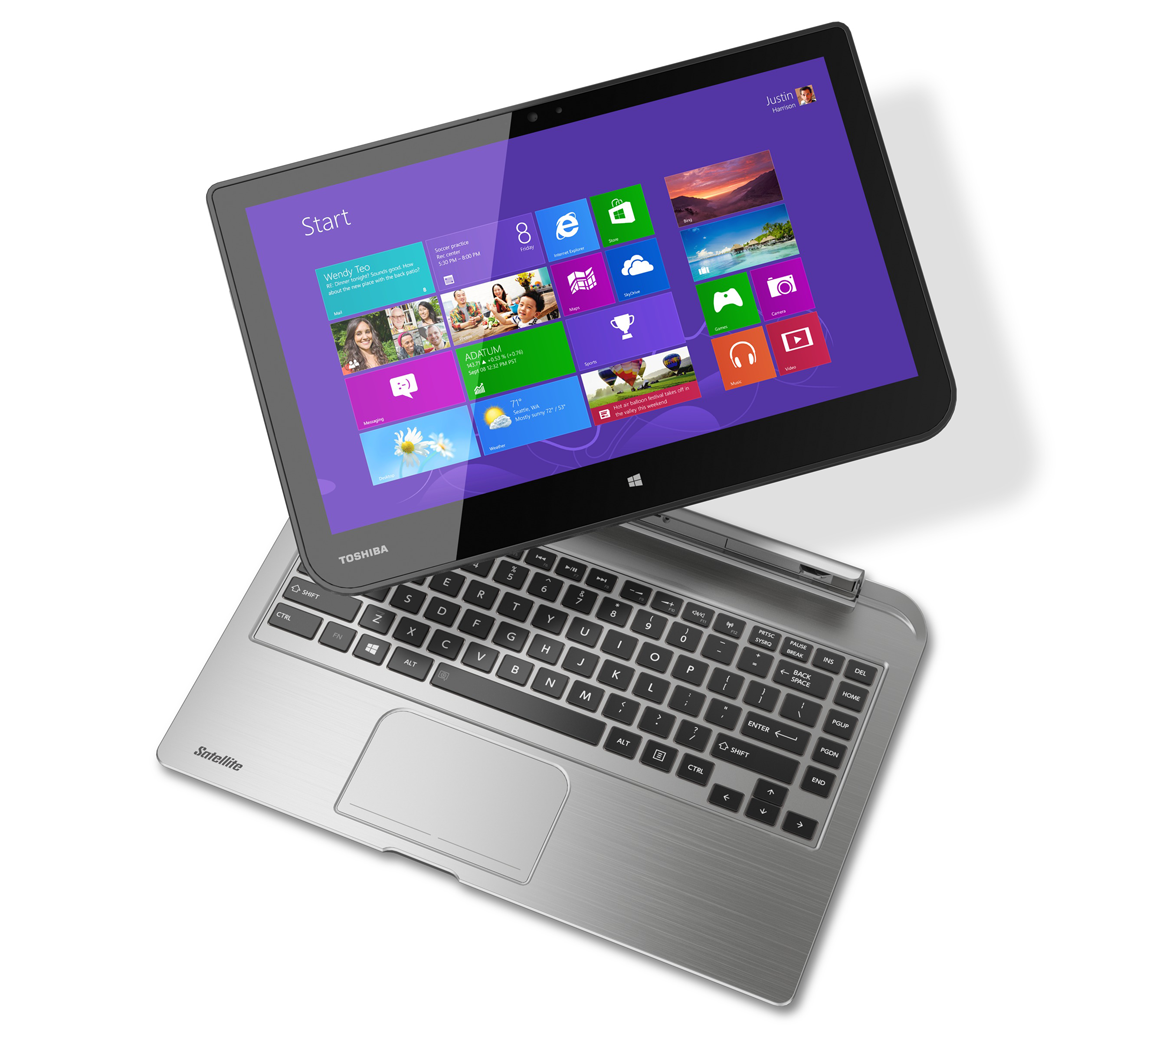 Toshiba intros new Satellites: The ND15t notebook, Encore ...
